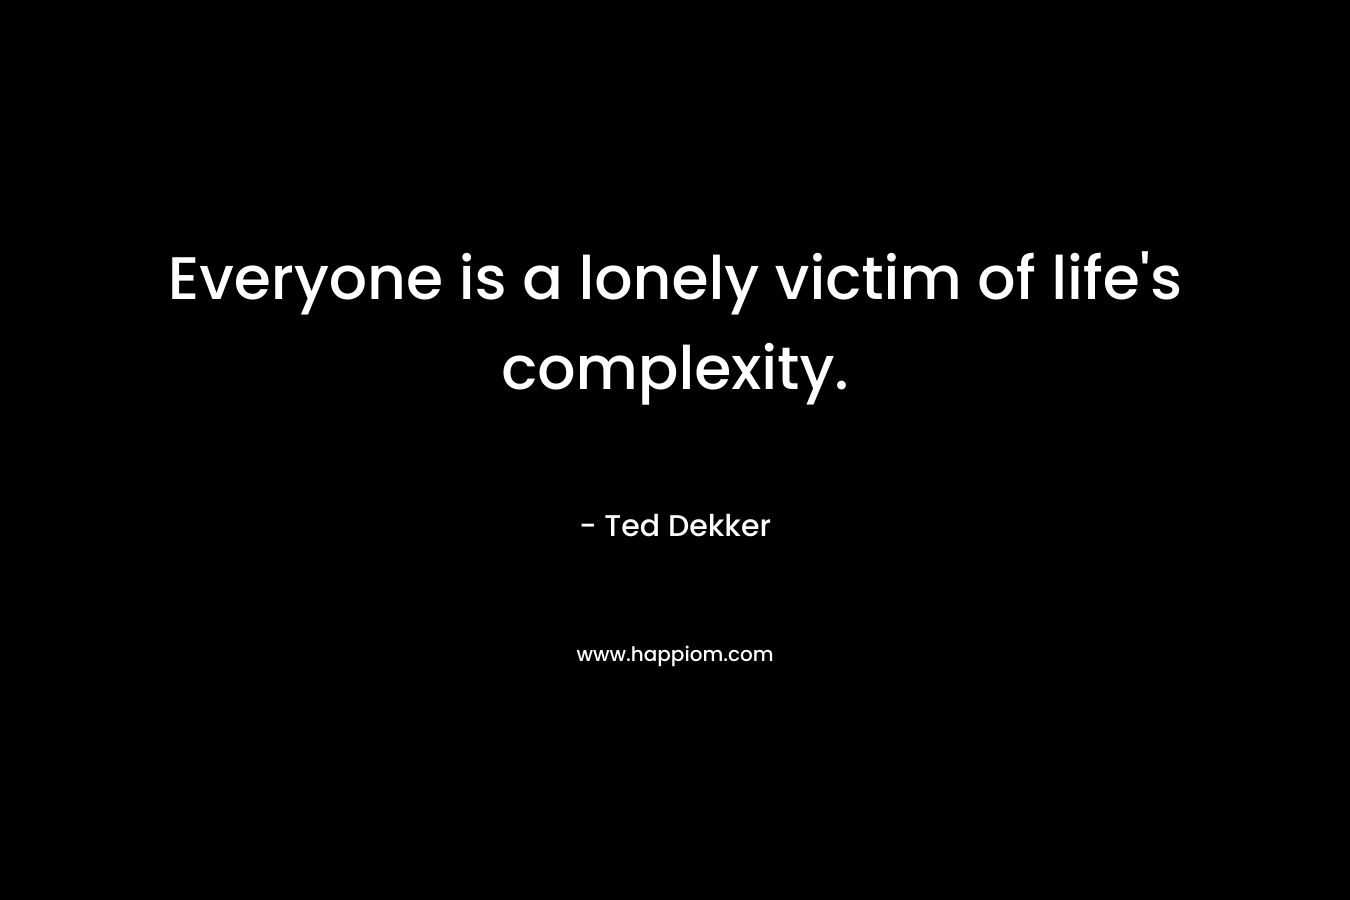 Everyone is a lonely victim of life’s complexity. – Ted Dekker